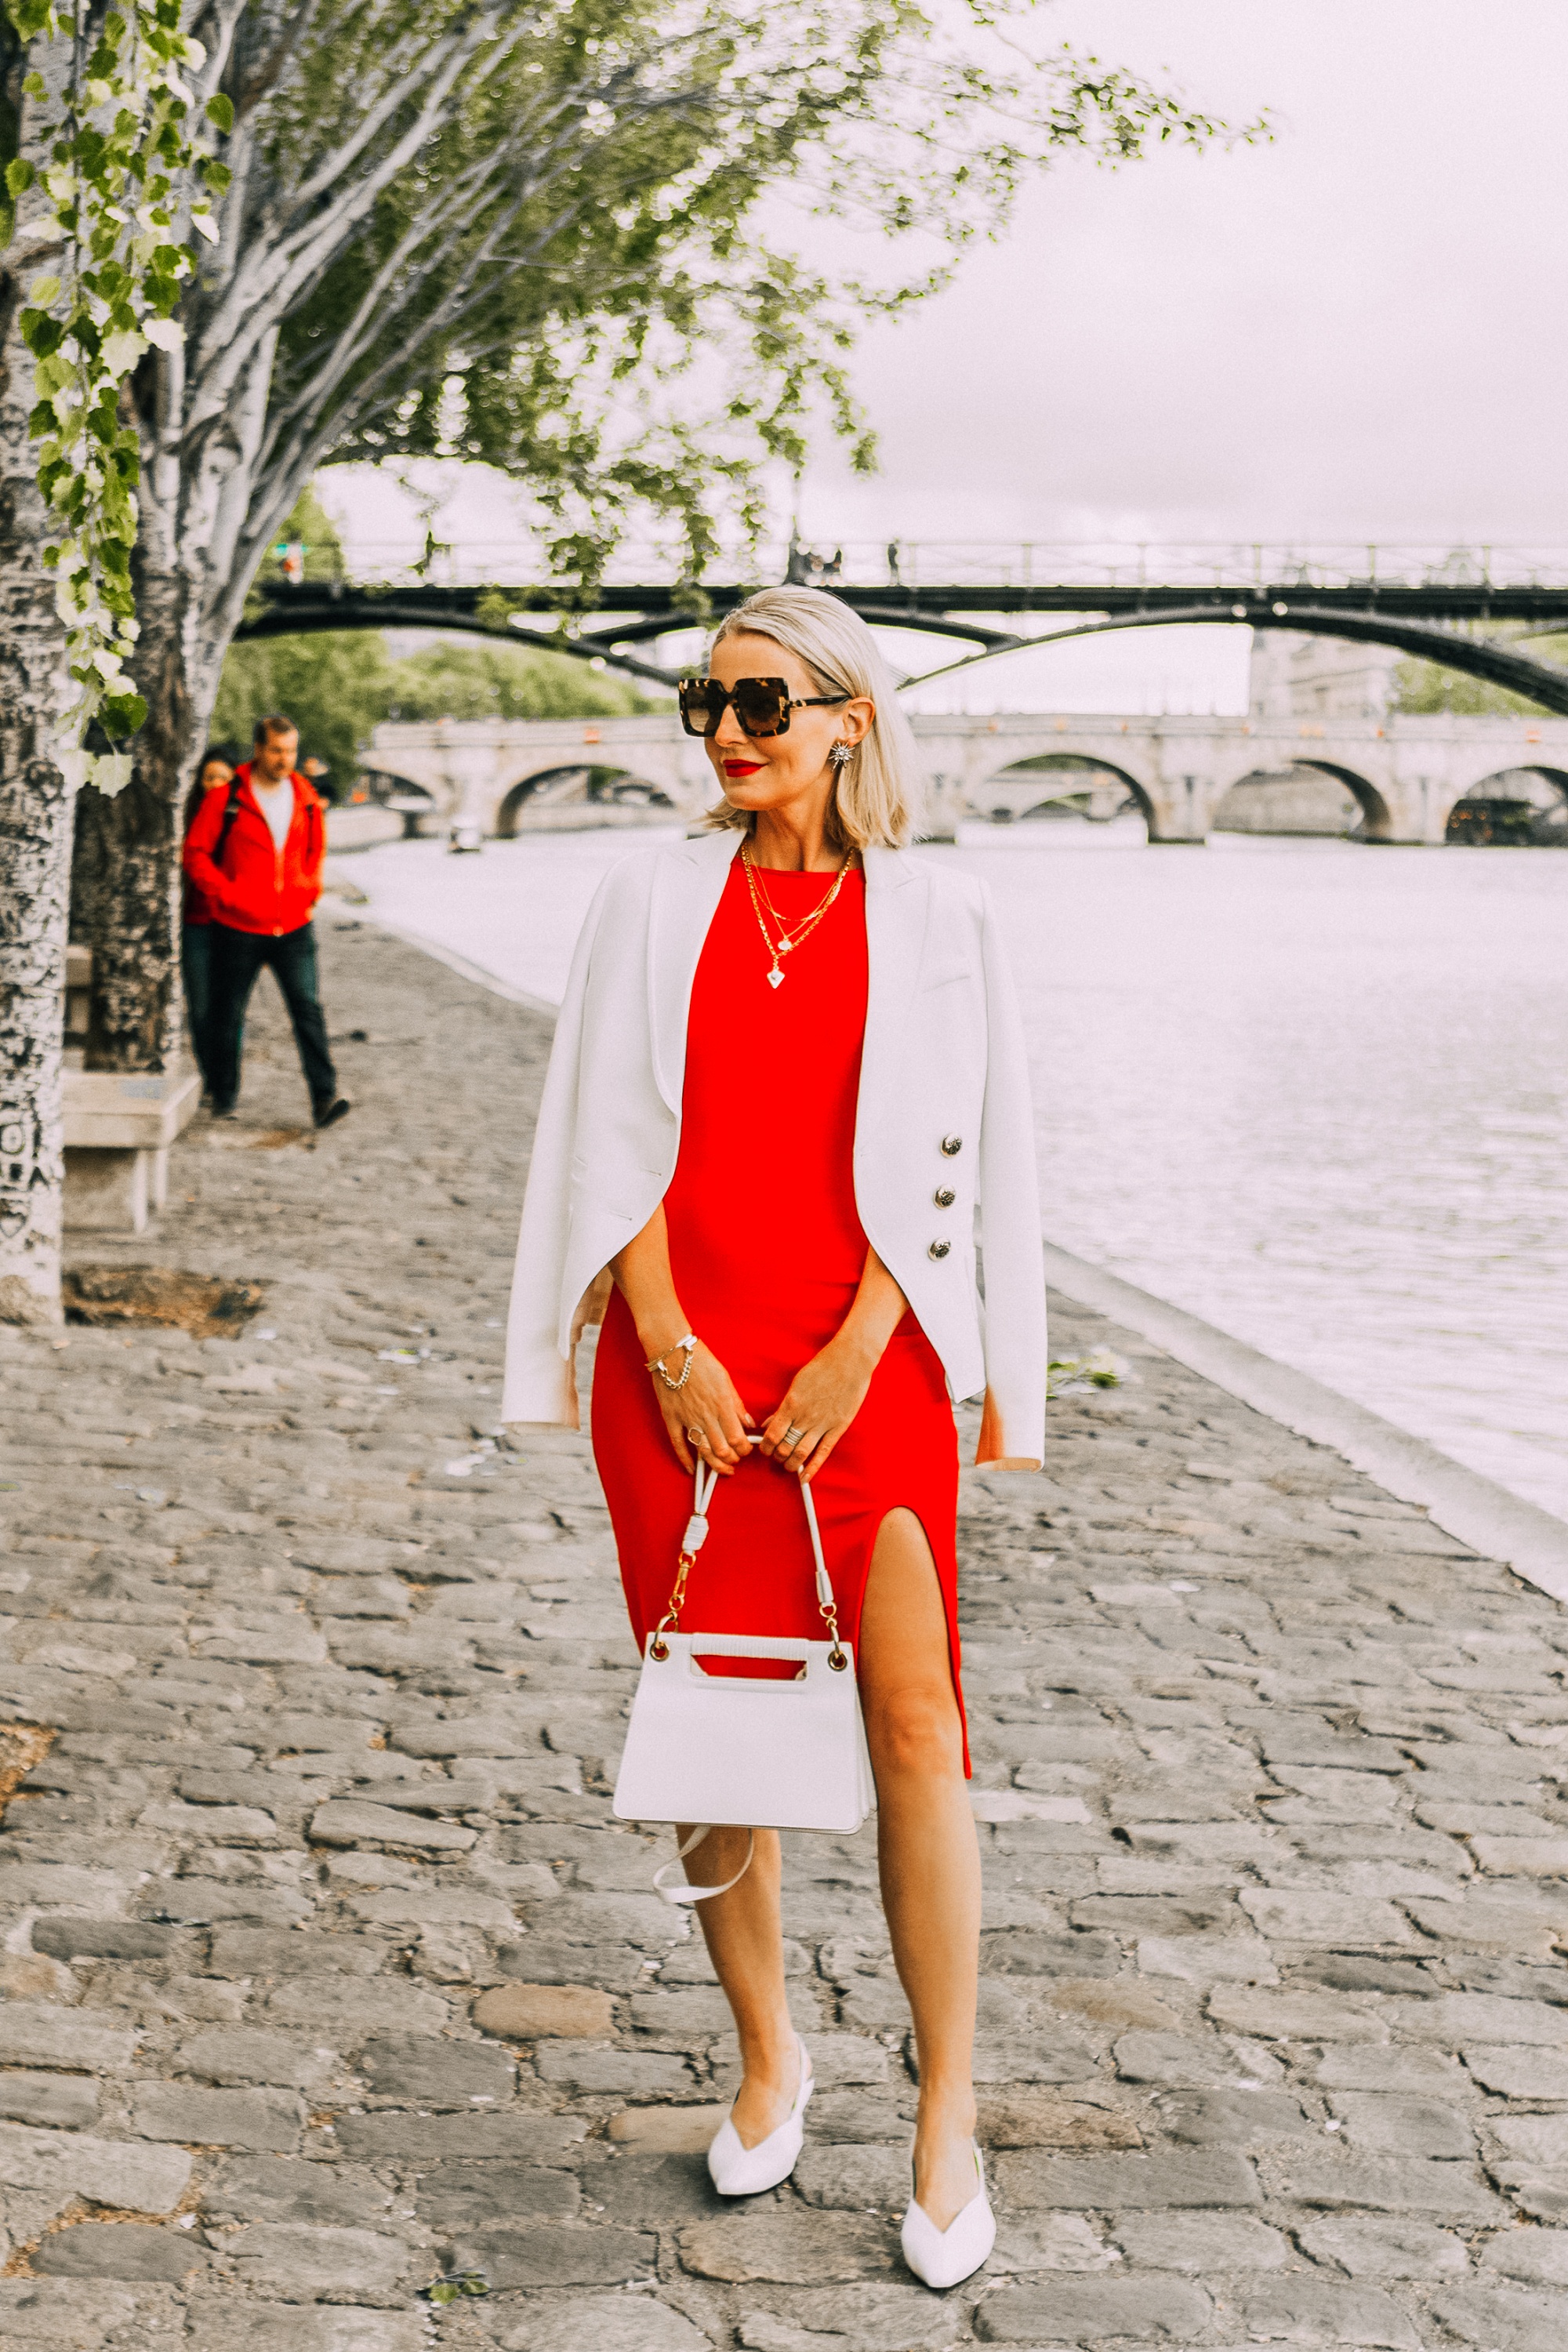 Date Night Dress, Fashion blogger over 40 Erin Busbee of BusbeeStyle.com wearing a red Bailey 44 dress with a white blazer, white Givenchy small whip bag, and white Smythe blazer in Paris, France